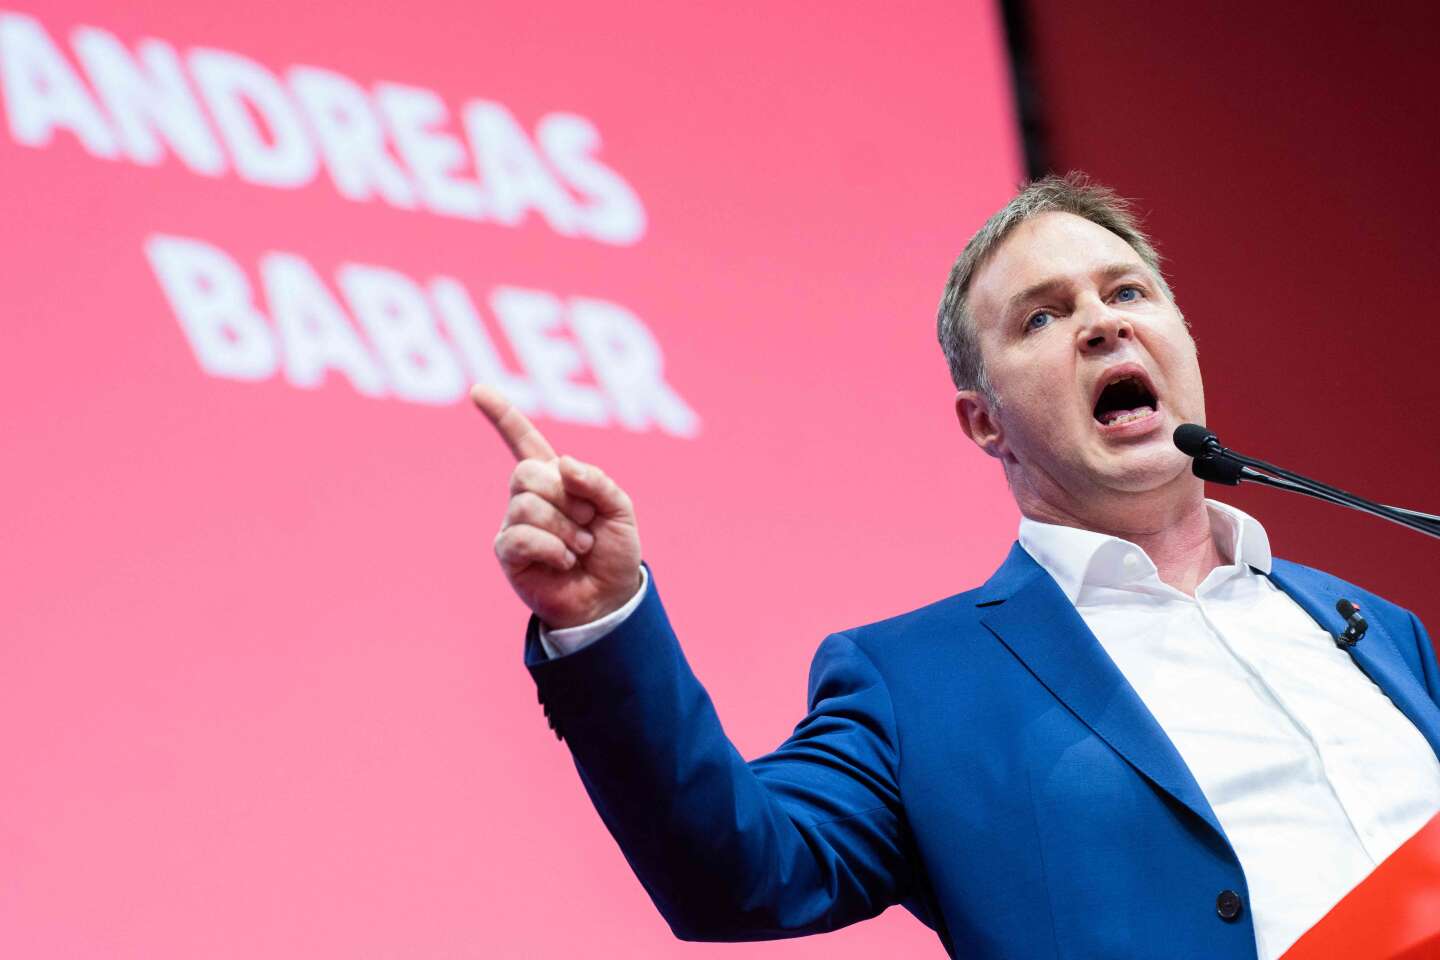 In Austria, the Social Democrats change leaders after an ‘Excel spreadsheet error’